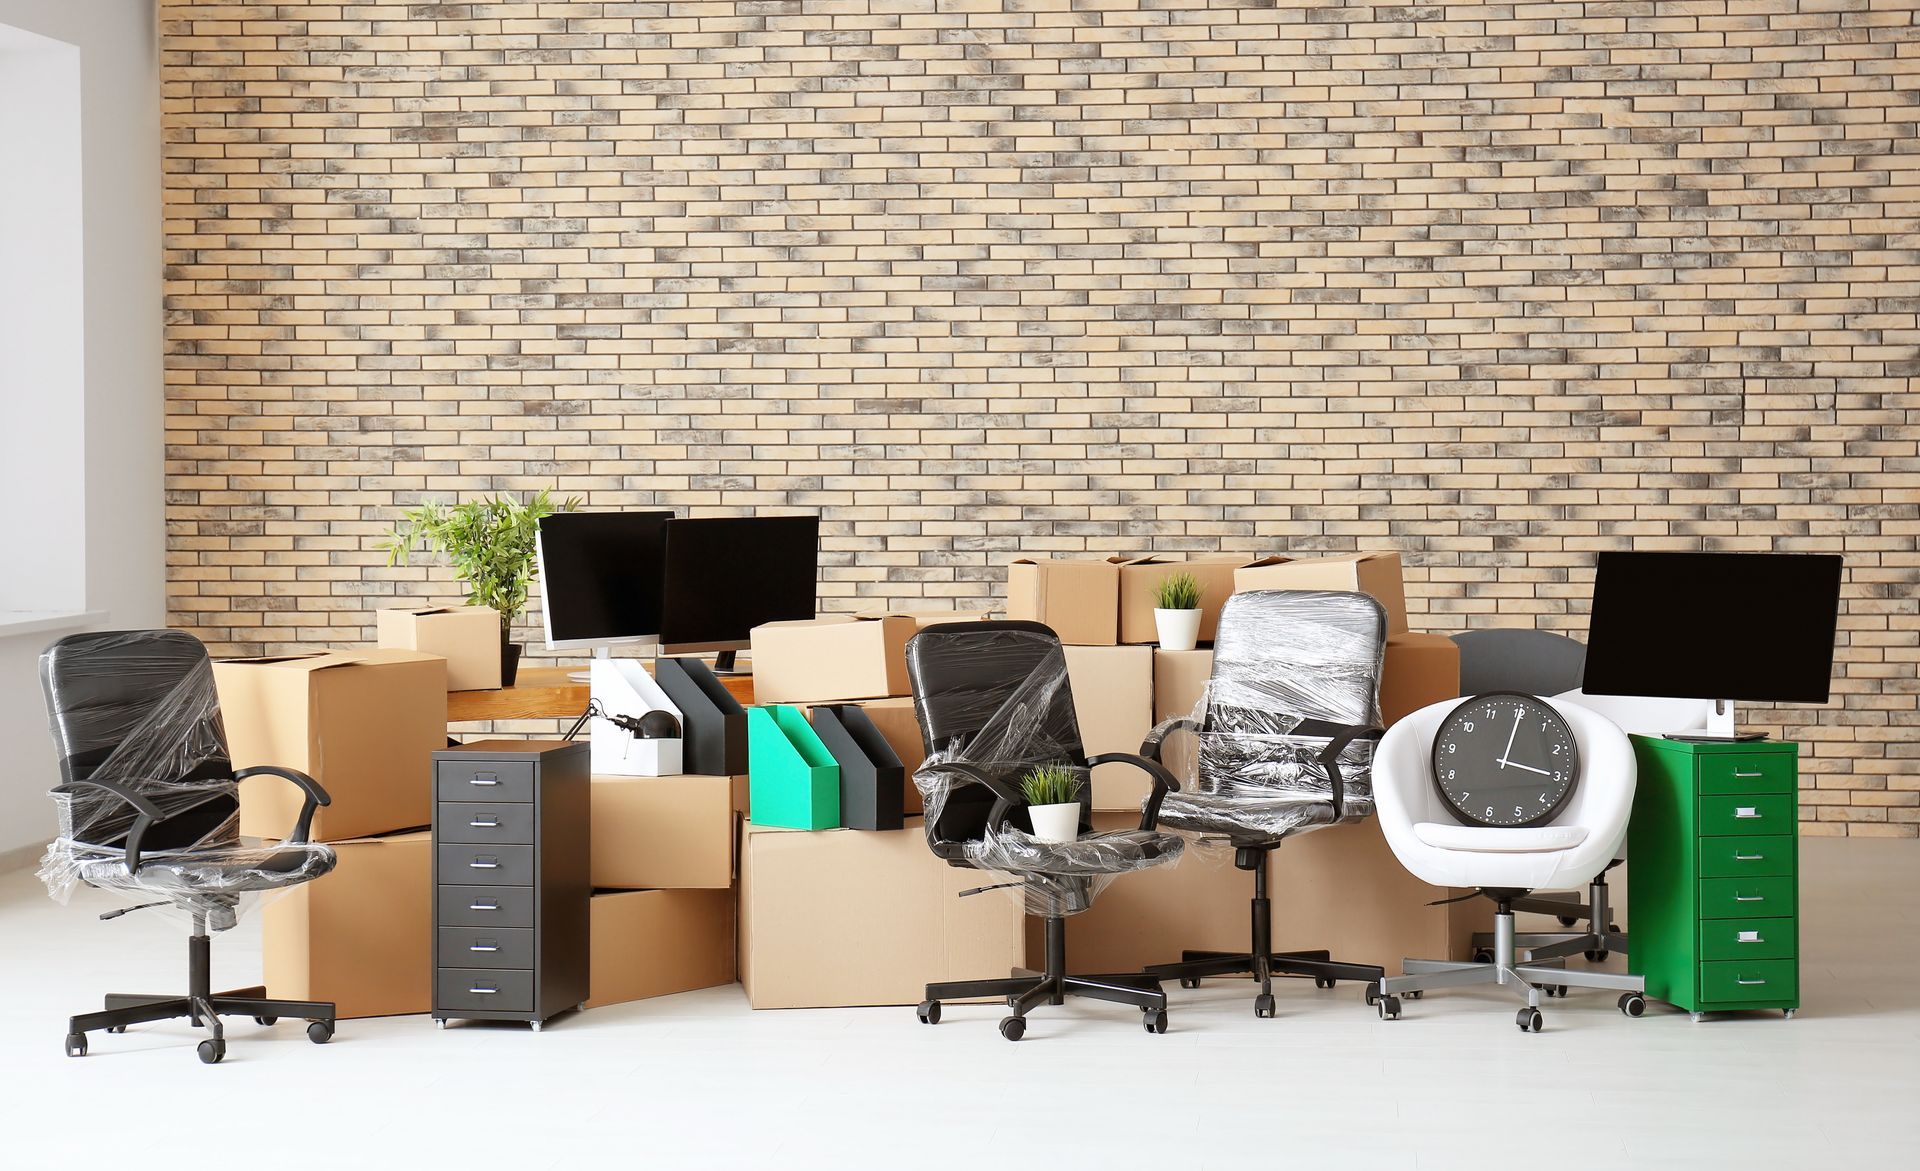 A row of office chairs and boxes in an office with a brick wall.